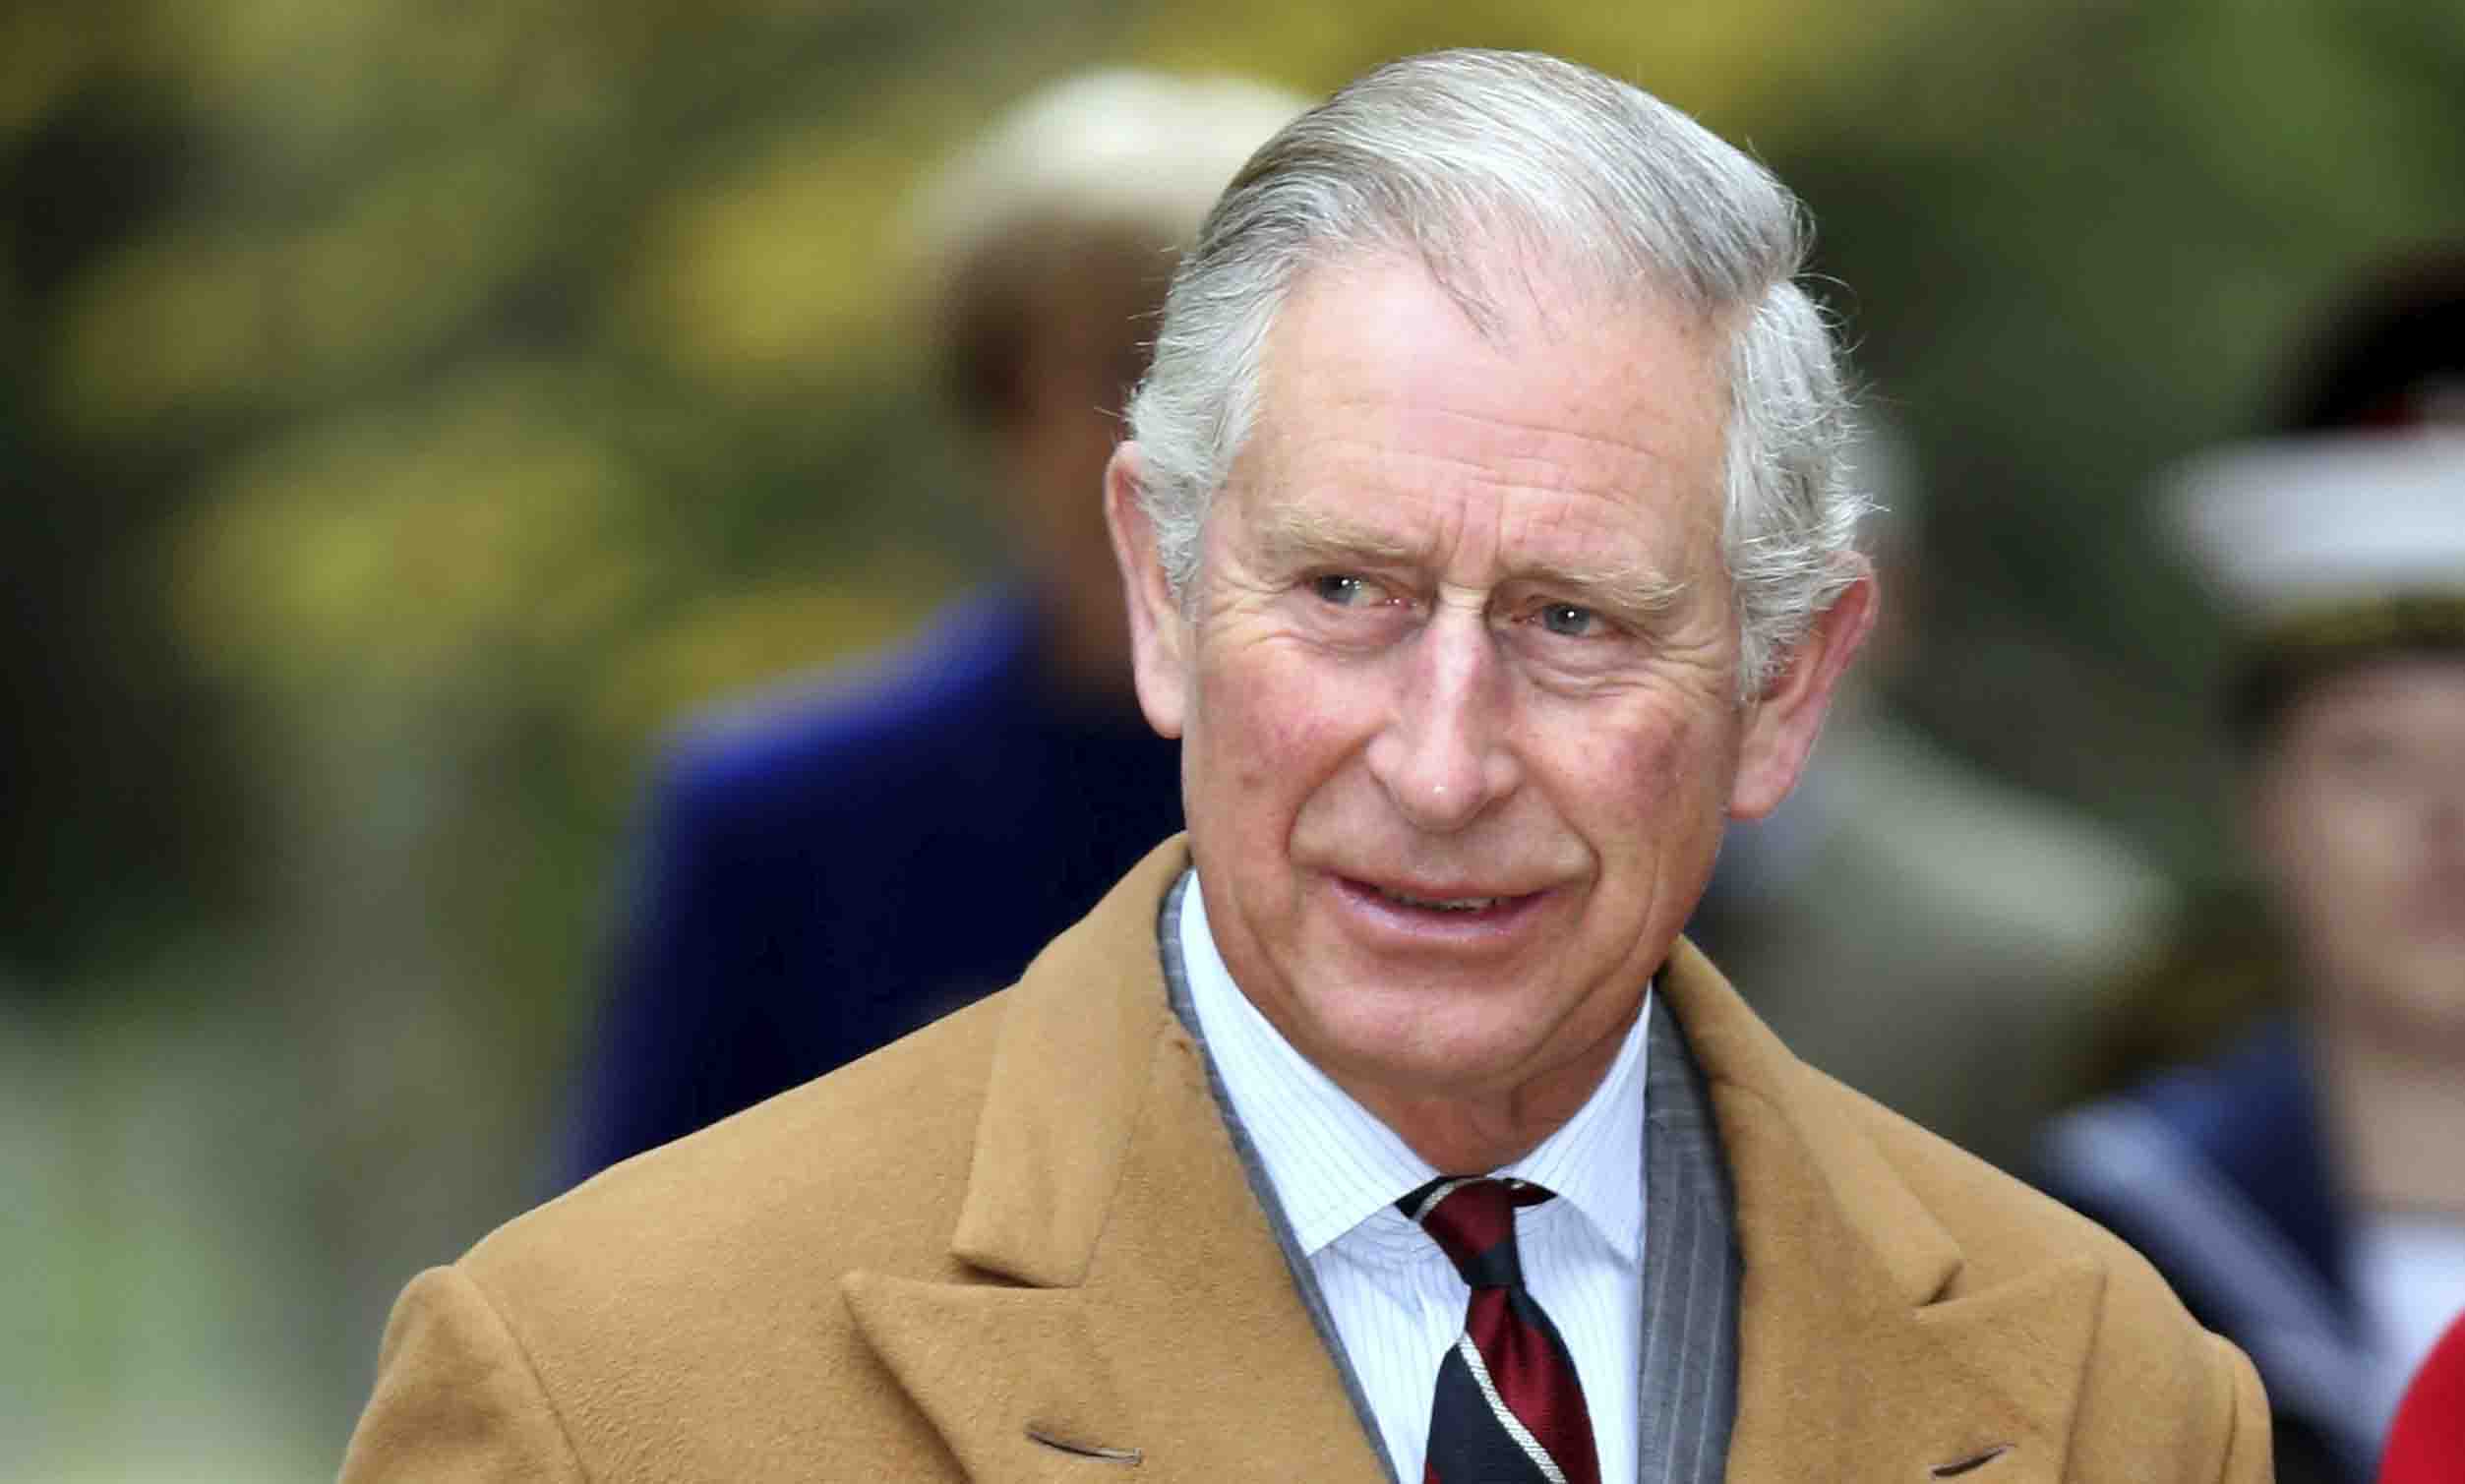 Prince Charles, the heir to the British throne. (Photo courtesy: theguardian.com)